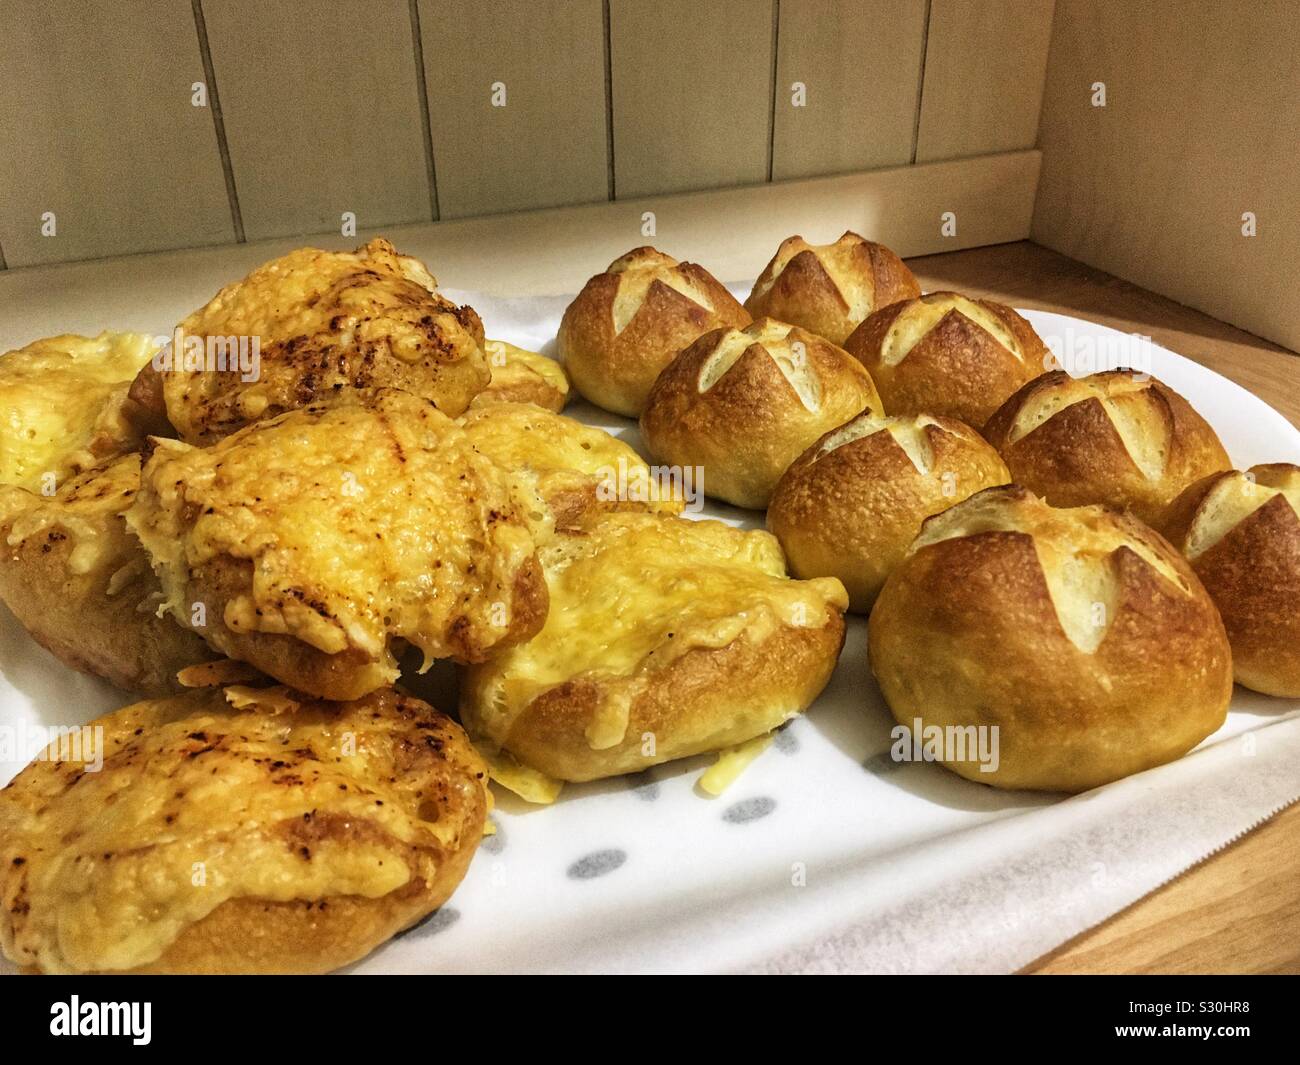 A tray of home made German pretzel buns and cheese pretzel buns (Laugenbrötchen) on a kitchen counter. Stock Photo